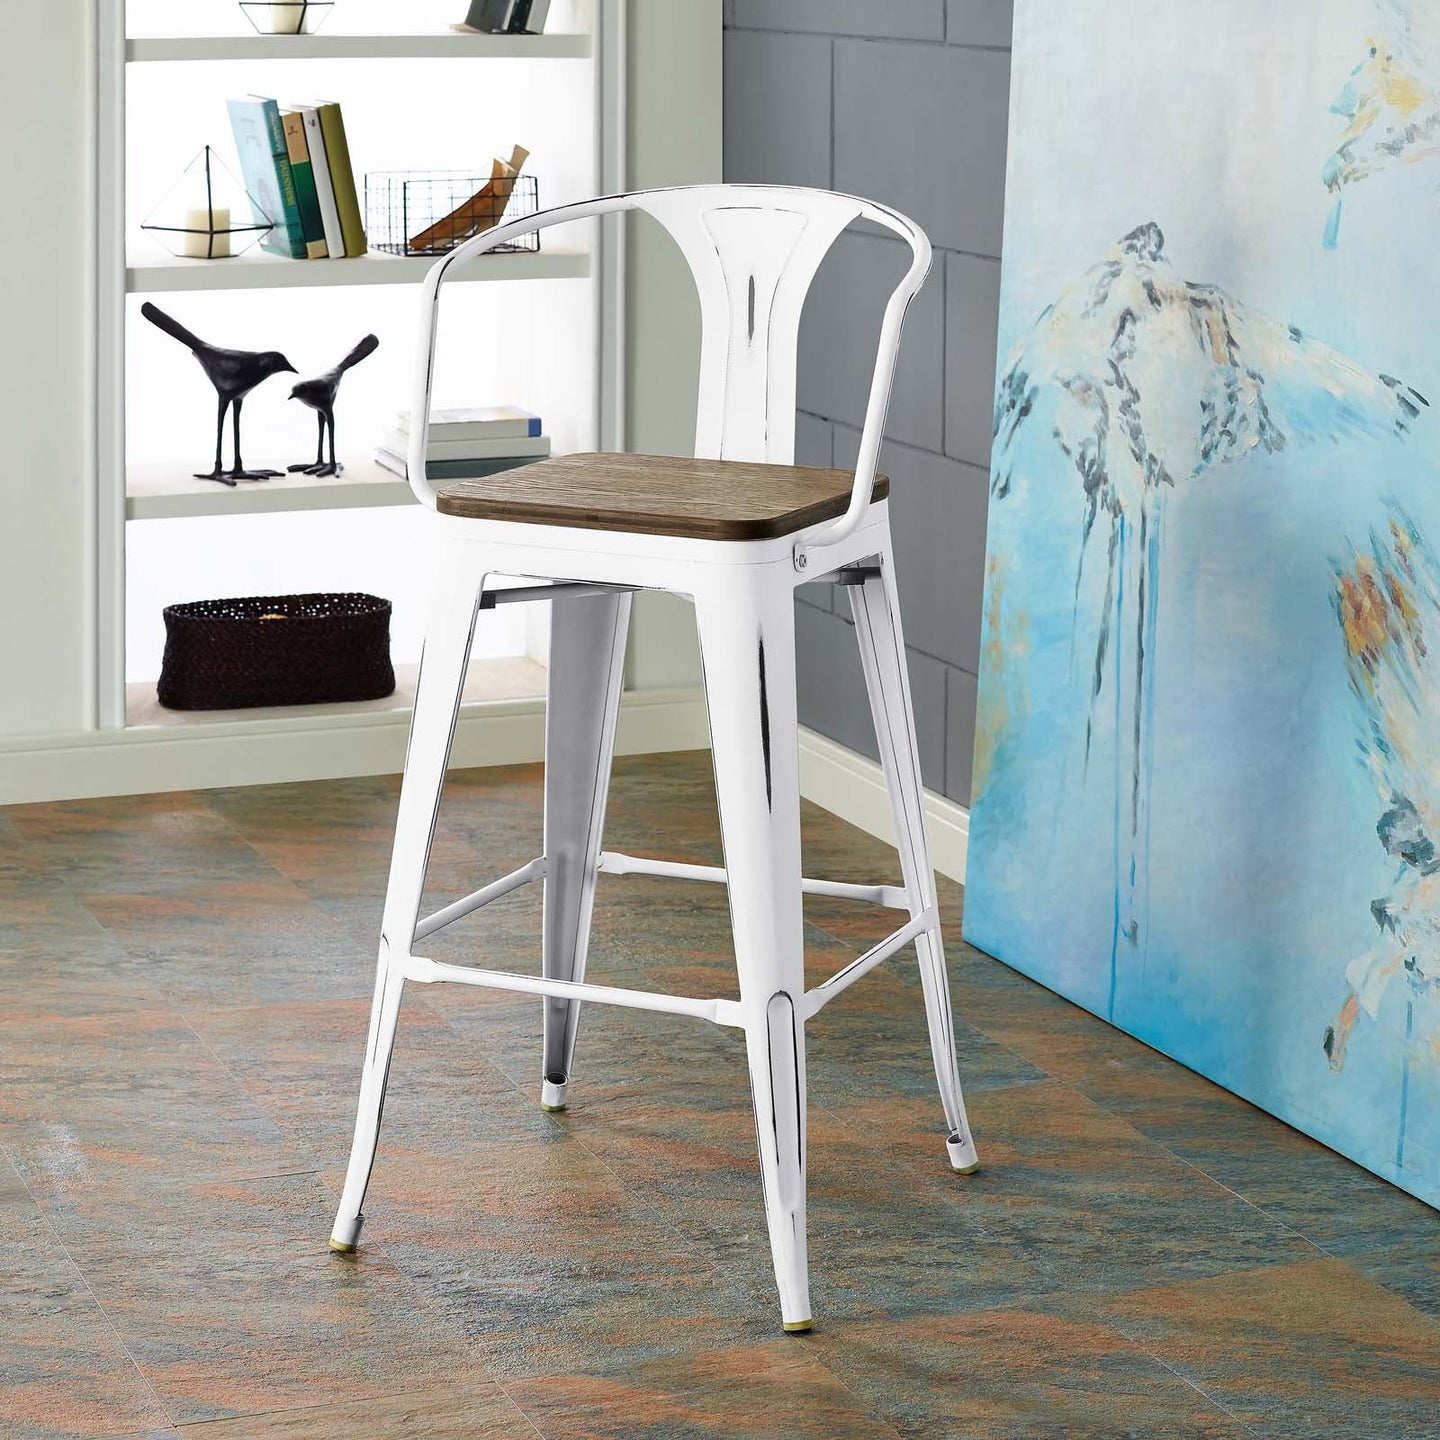 Promenade Wood Seat Bar Stool with Arms